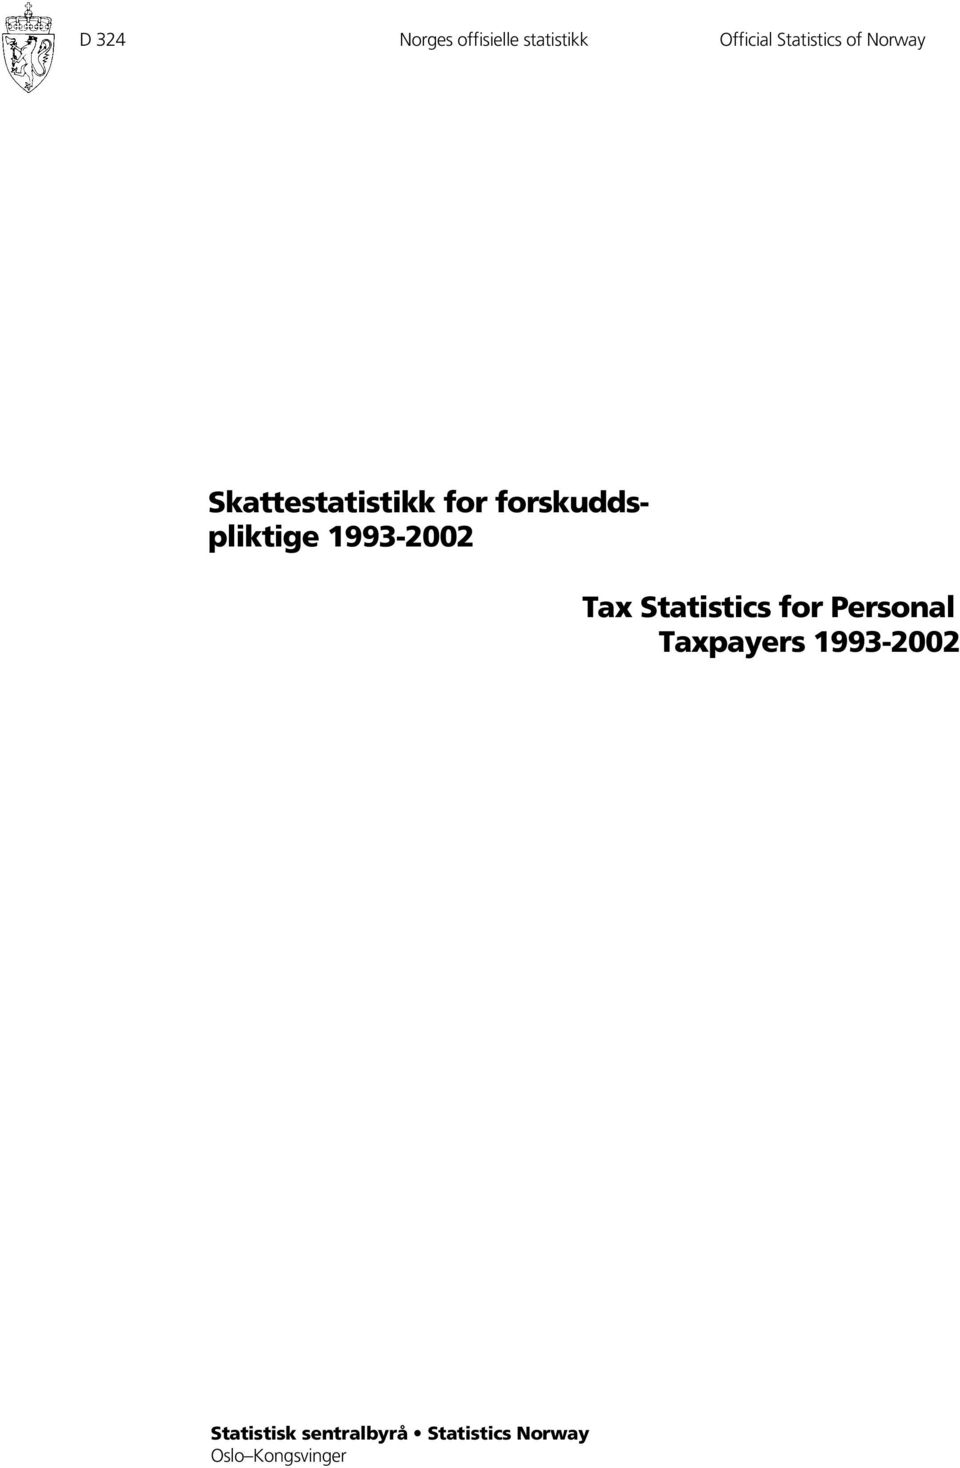 1993-2002 Tax Statistics for Personal Taxpayers